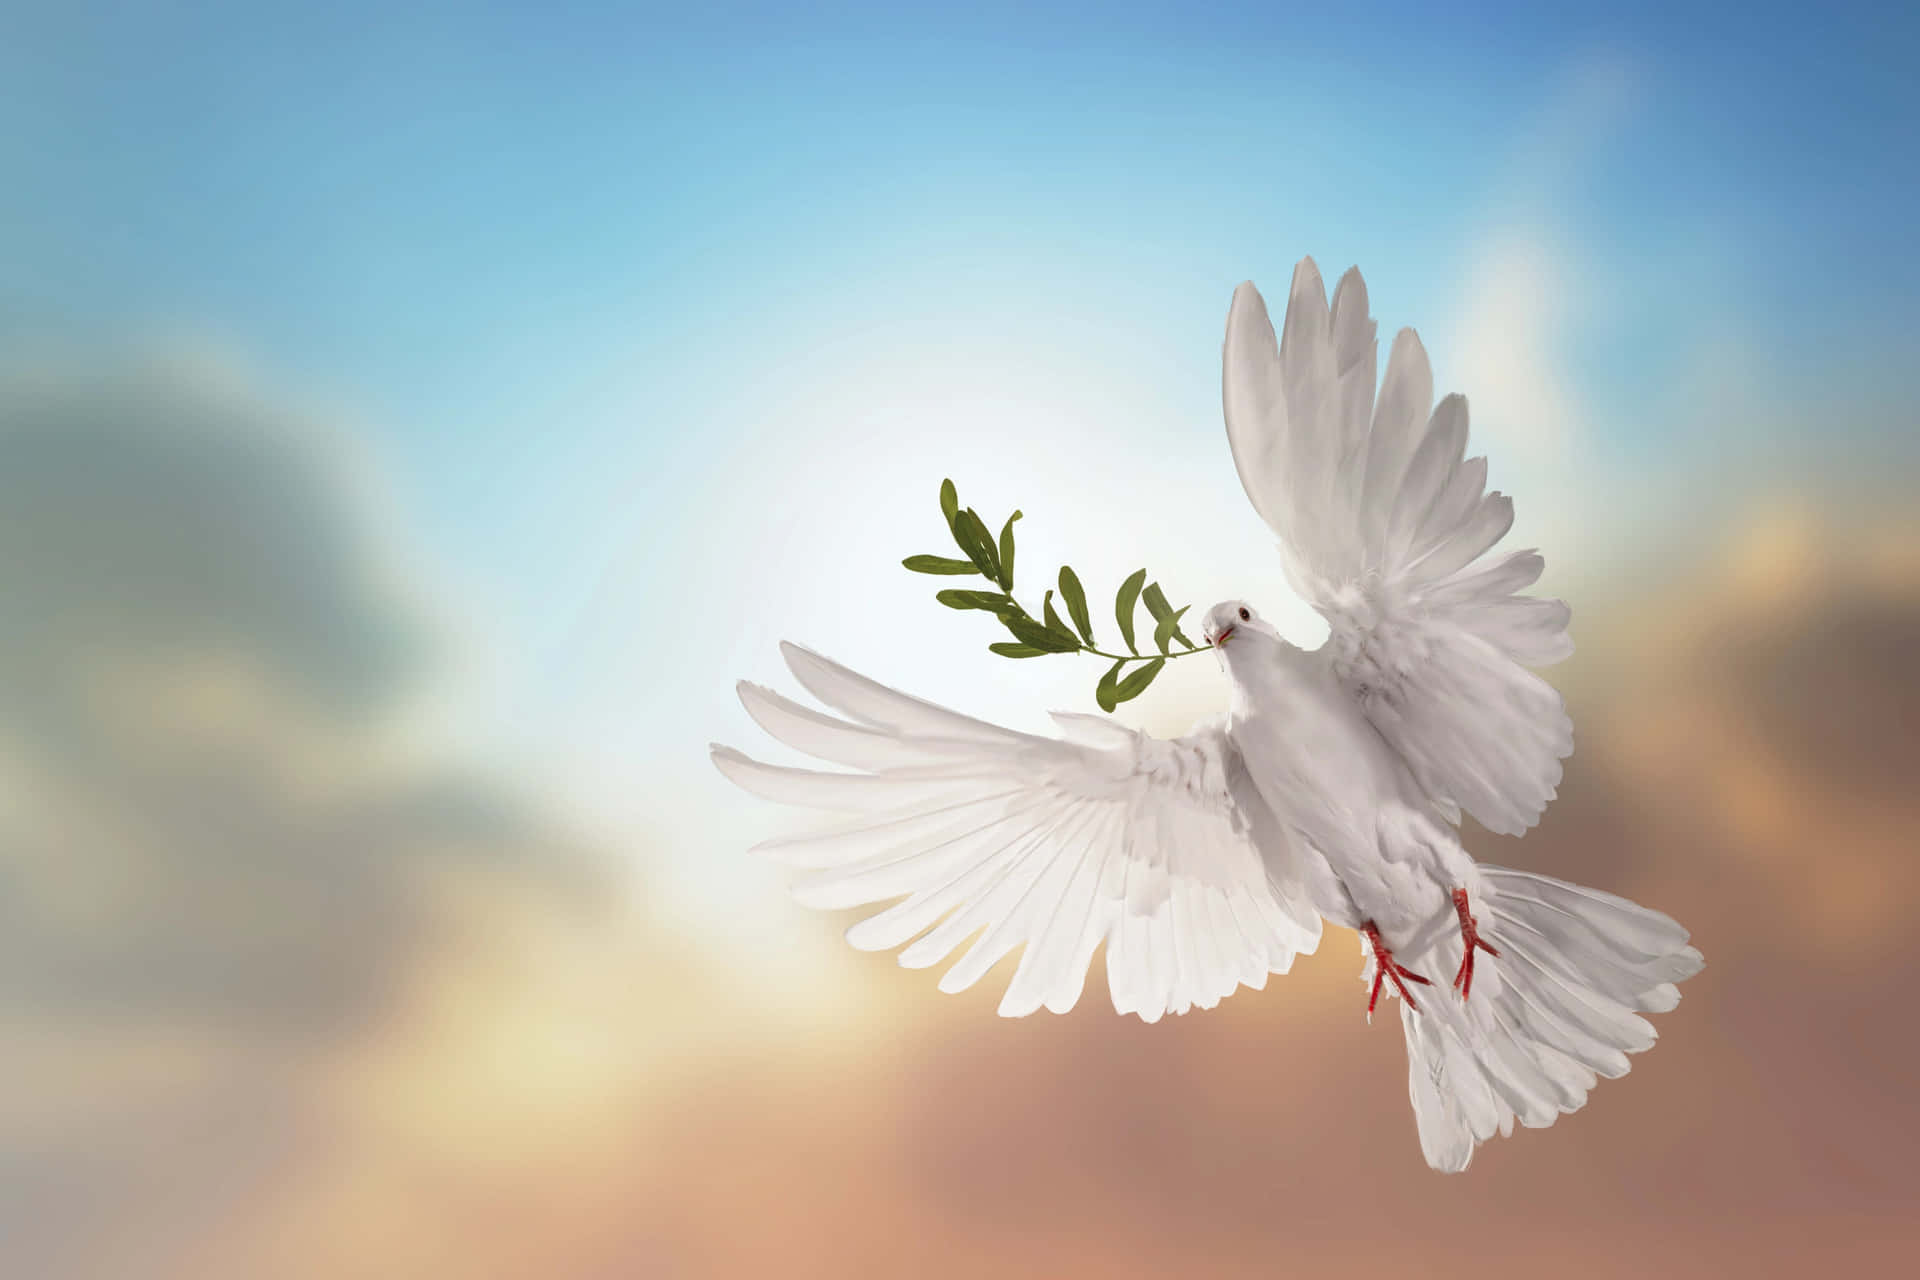 A White Dove Flying In The Sky With A Branch